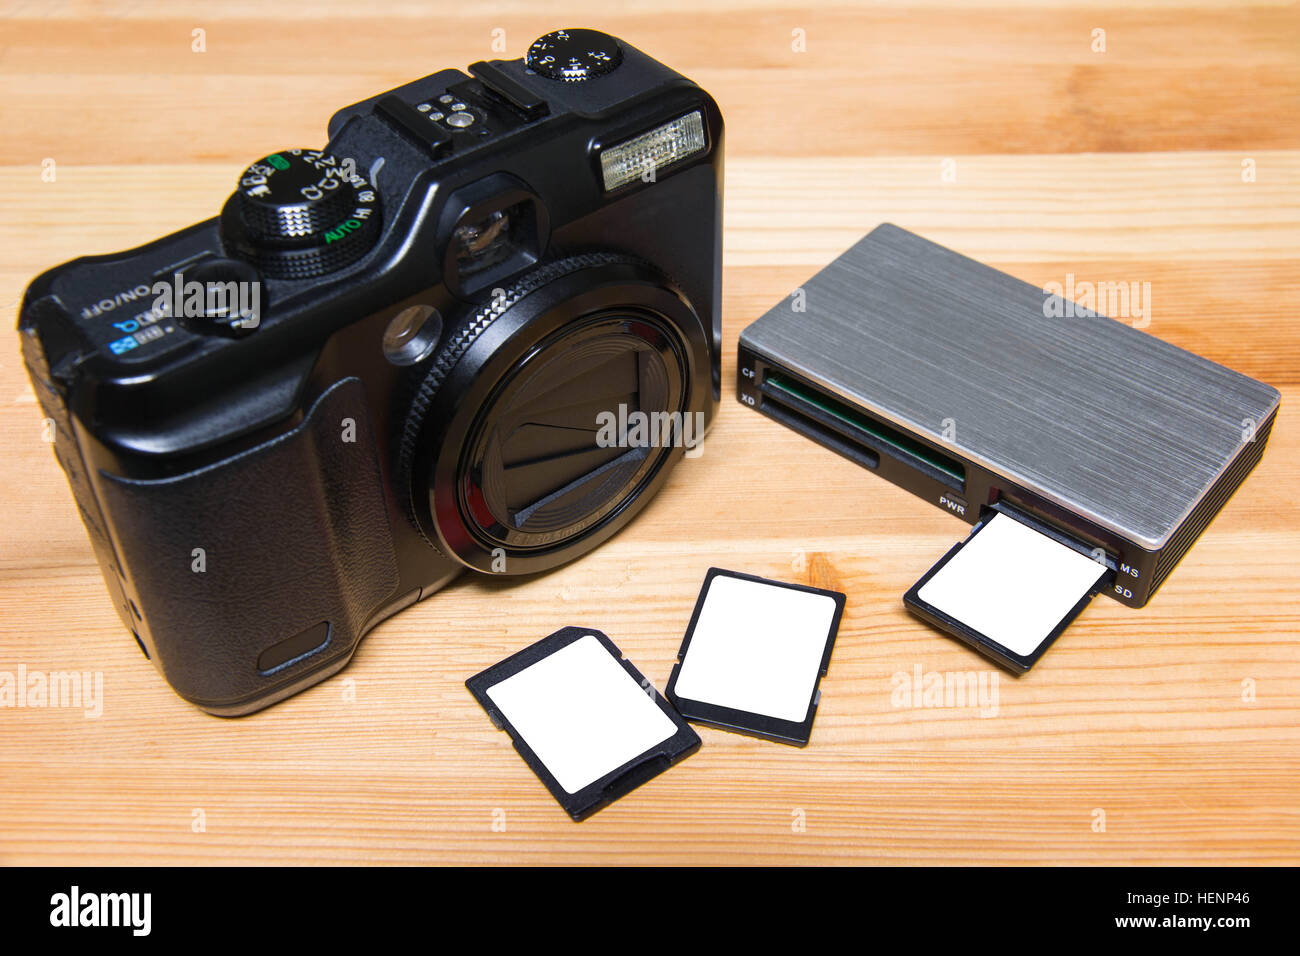 usb card reader with 3 cards and camera on wooden table ready to use Stock Photo